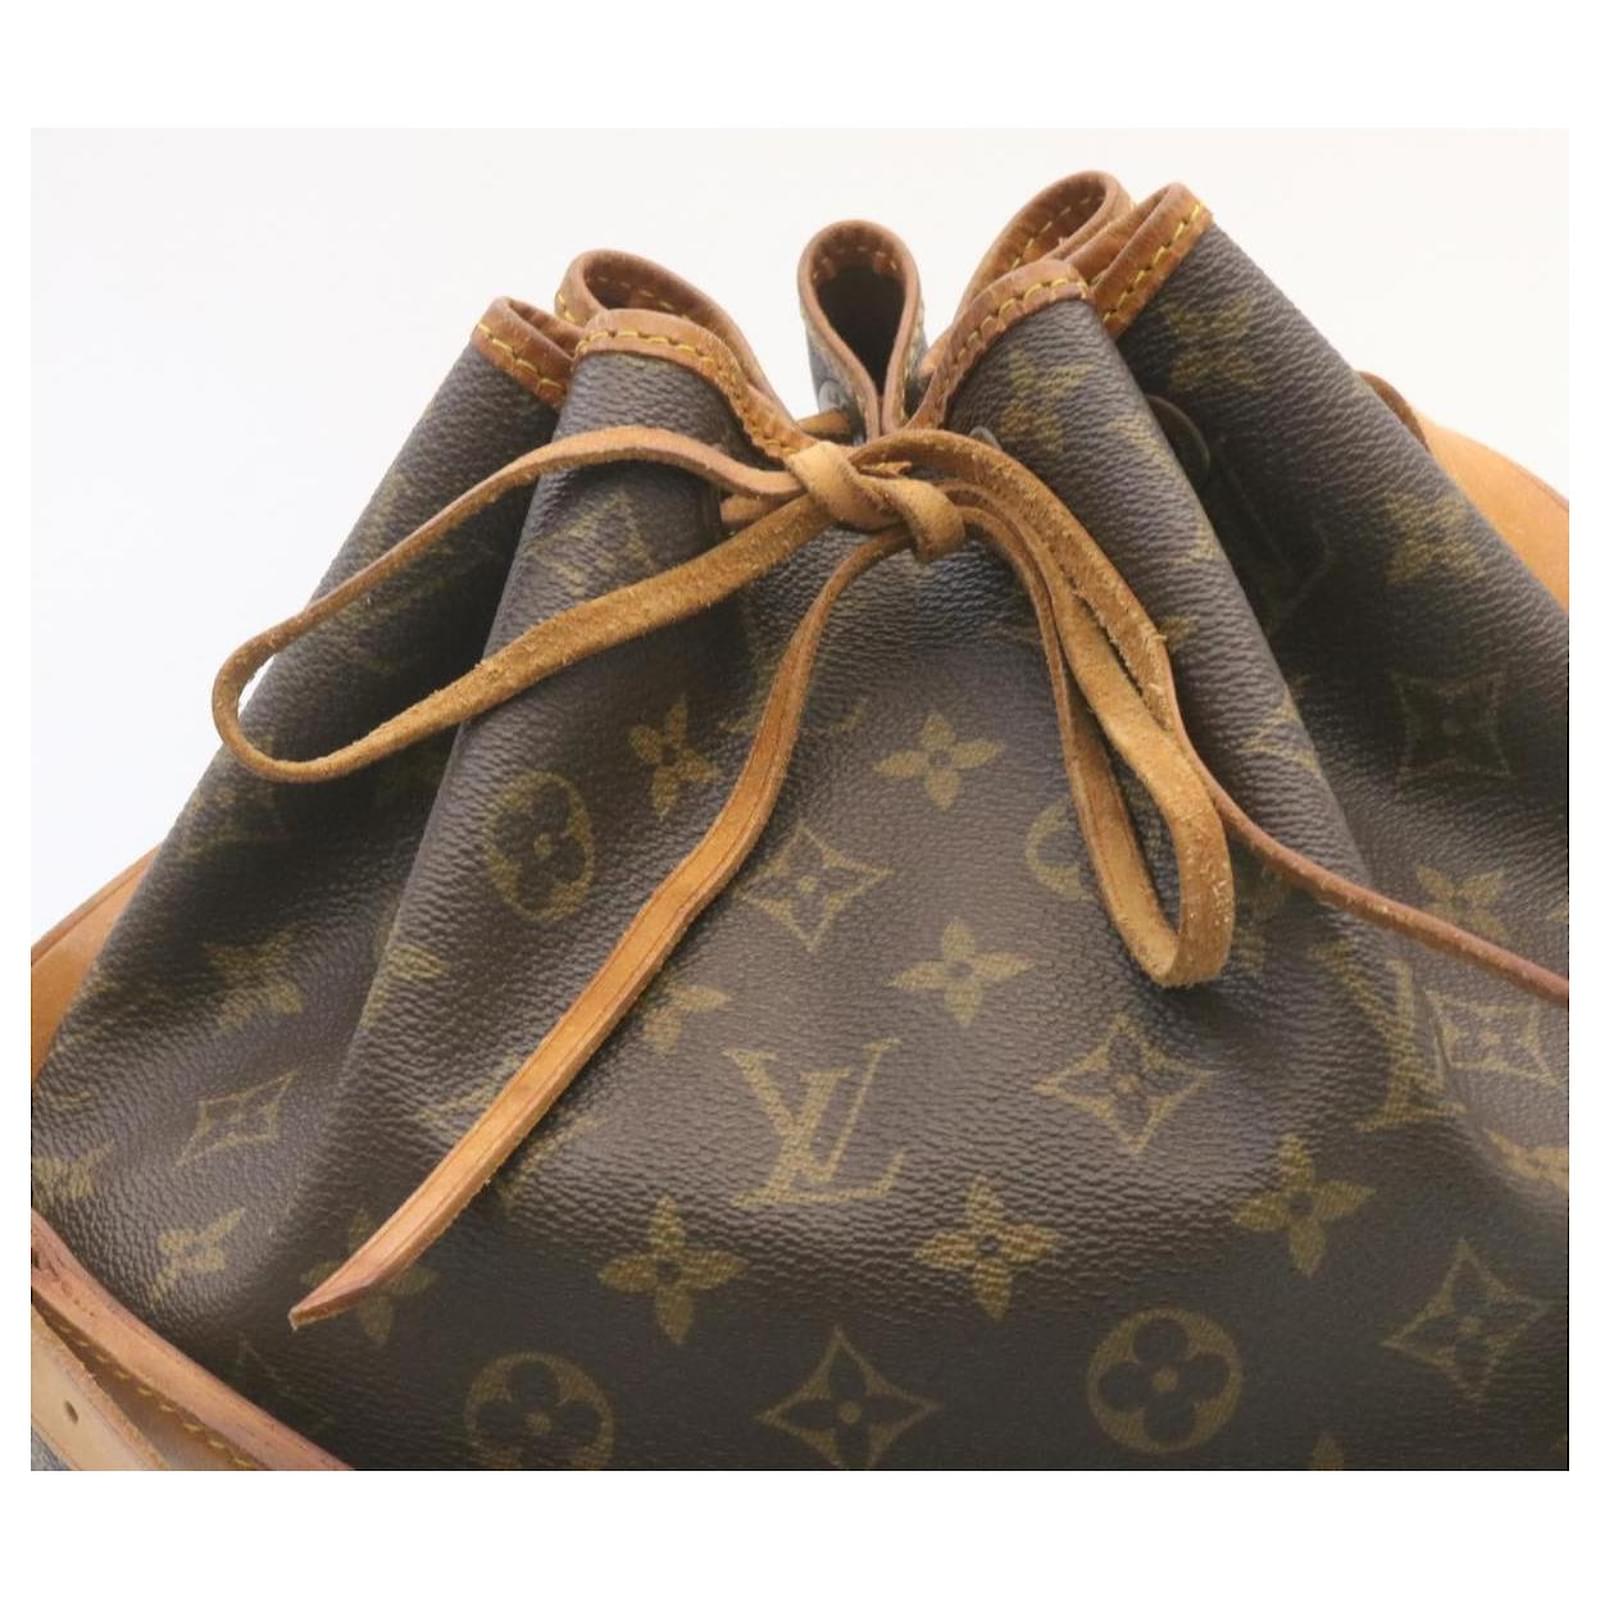 The Ultimate Guide to the Louis Vuitton Speedy  Louis vuitton handbags  neverfull Louis vuitton Louis vuitton handbags